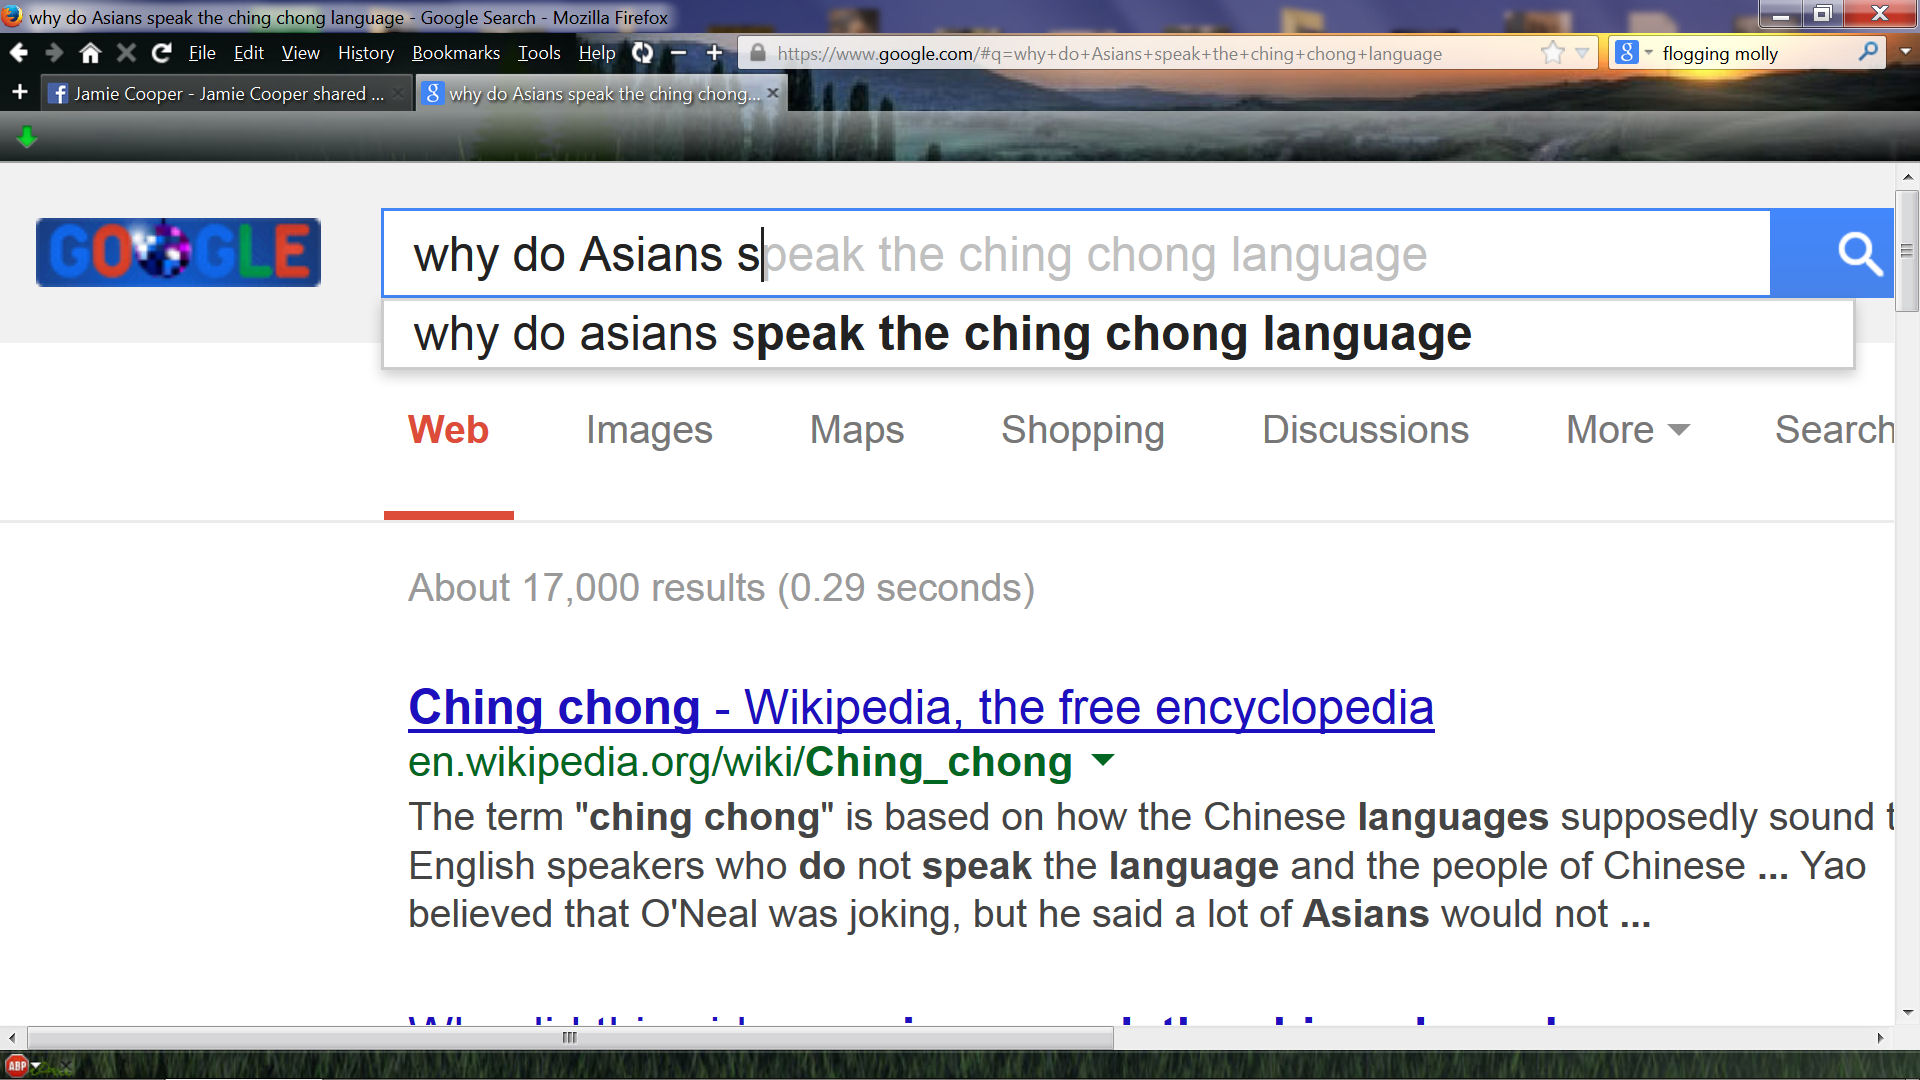 I was trying to google "why do asians steam rice?" and google suggested "why do Asians speak the ching chong language"